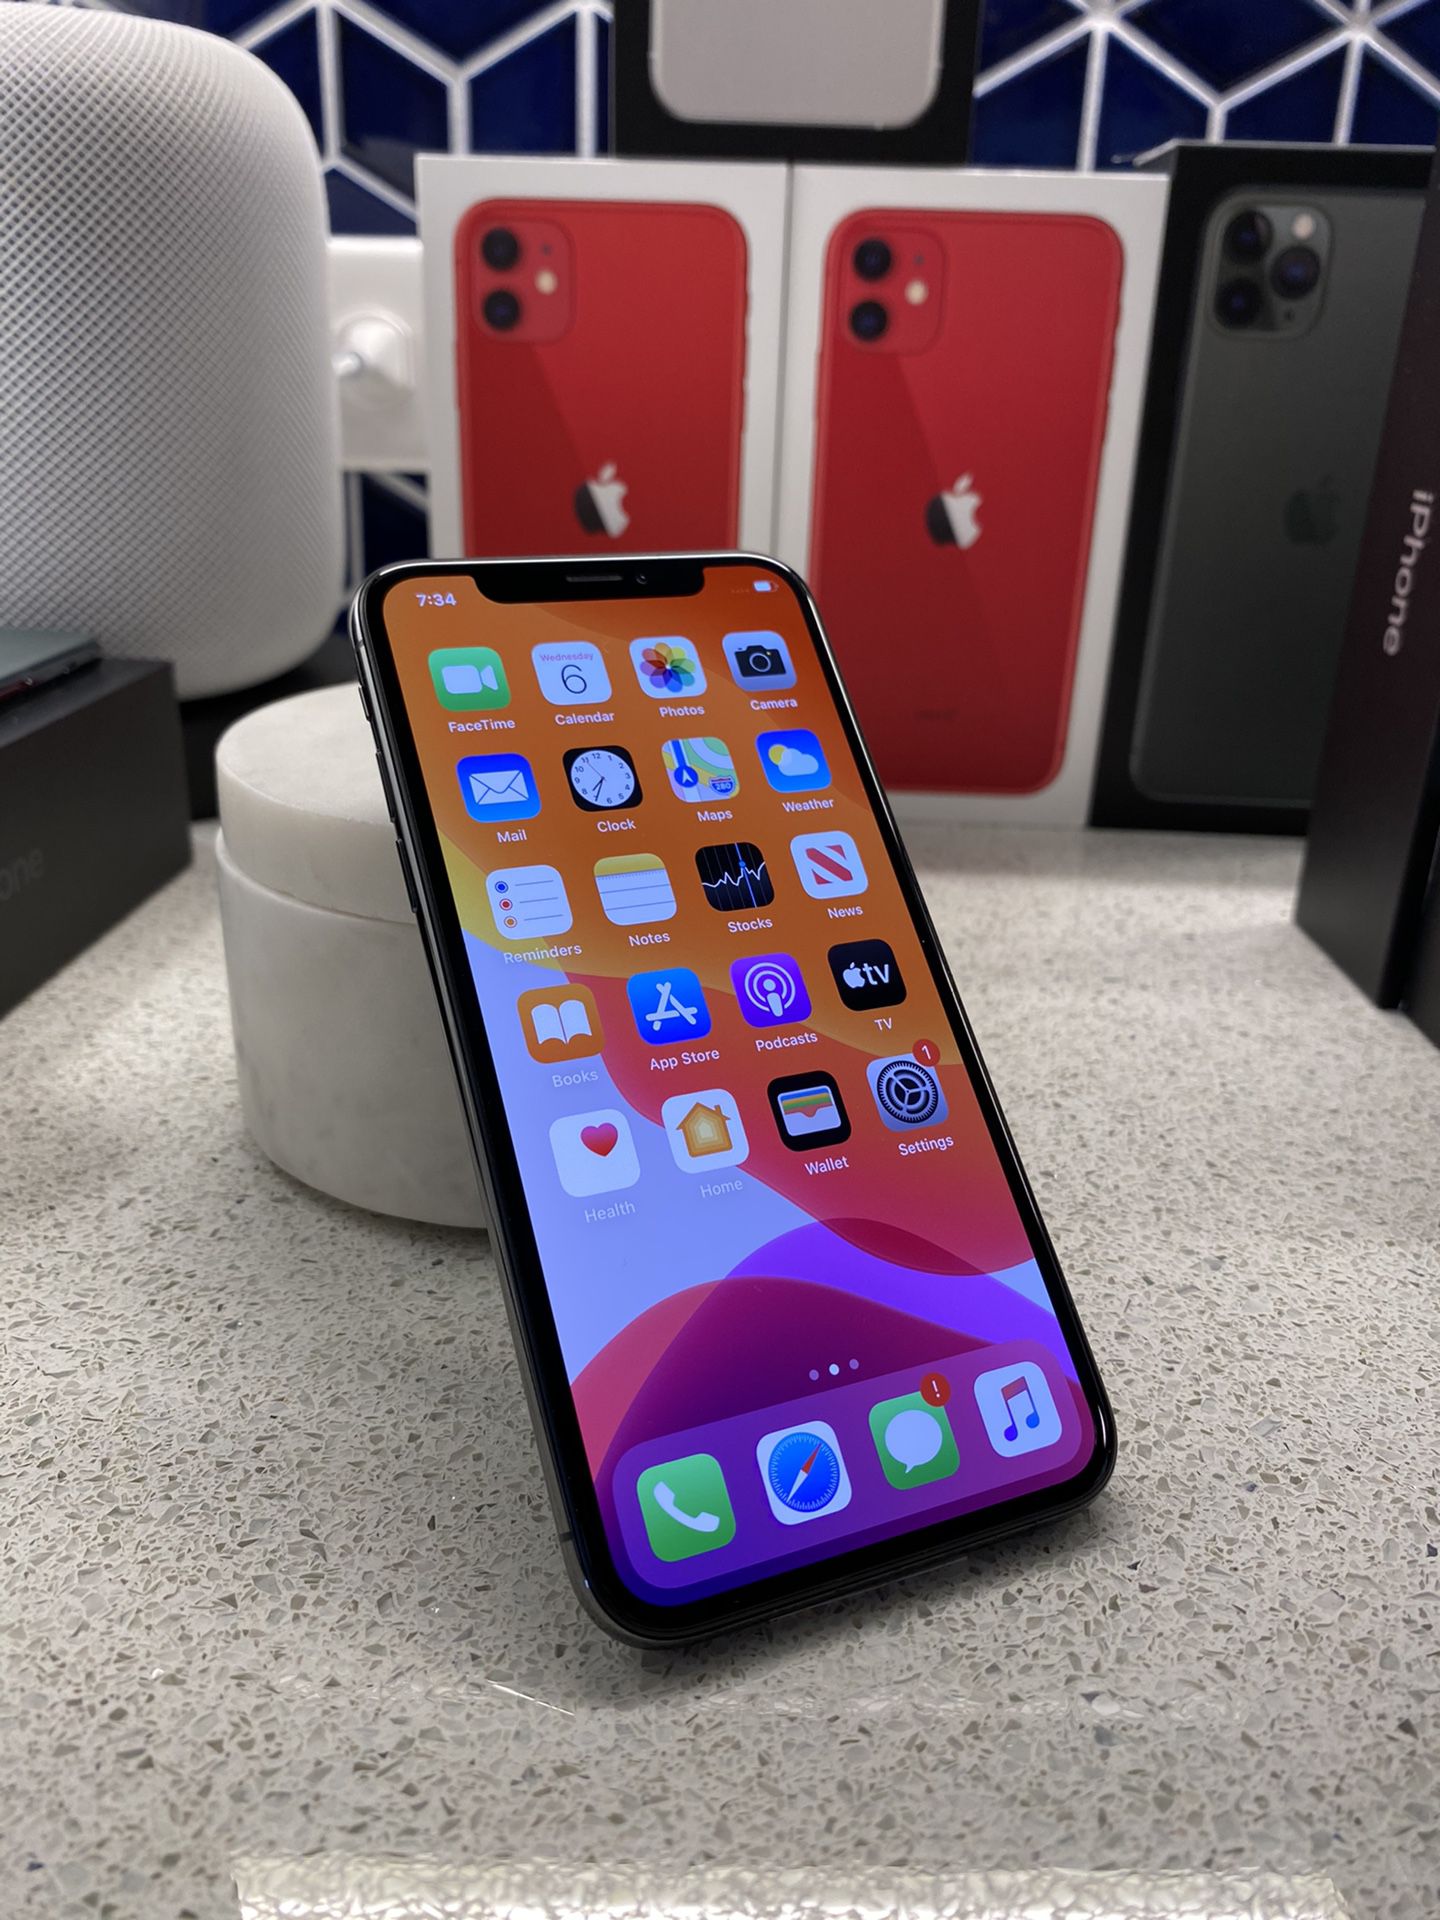 iPhone X 256GB unlocked to any carrier! Like new!!